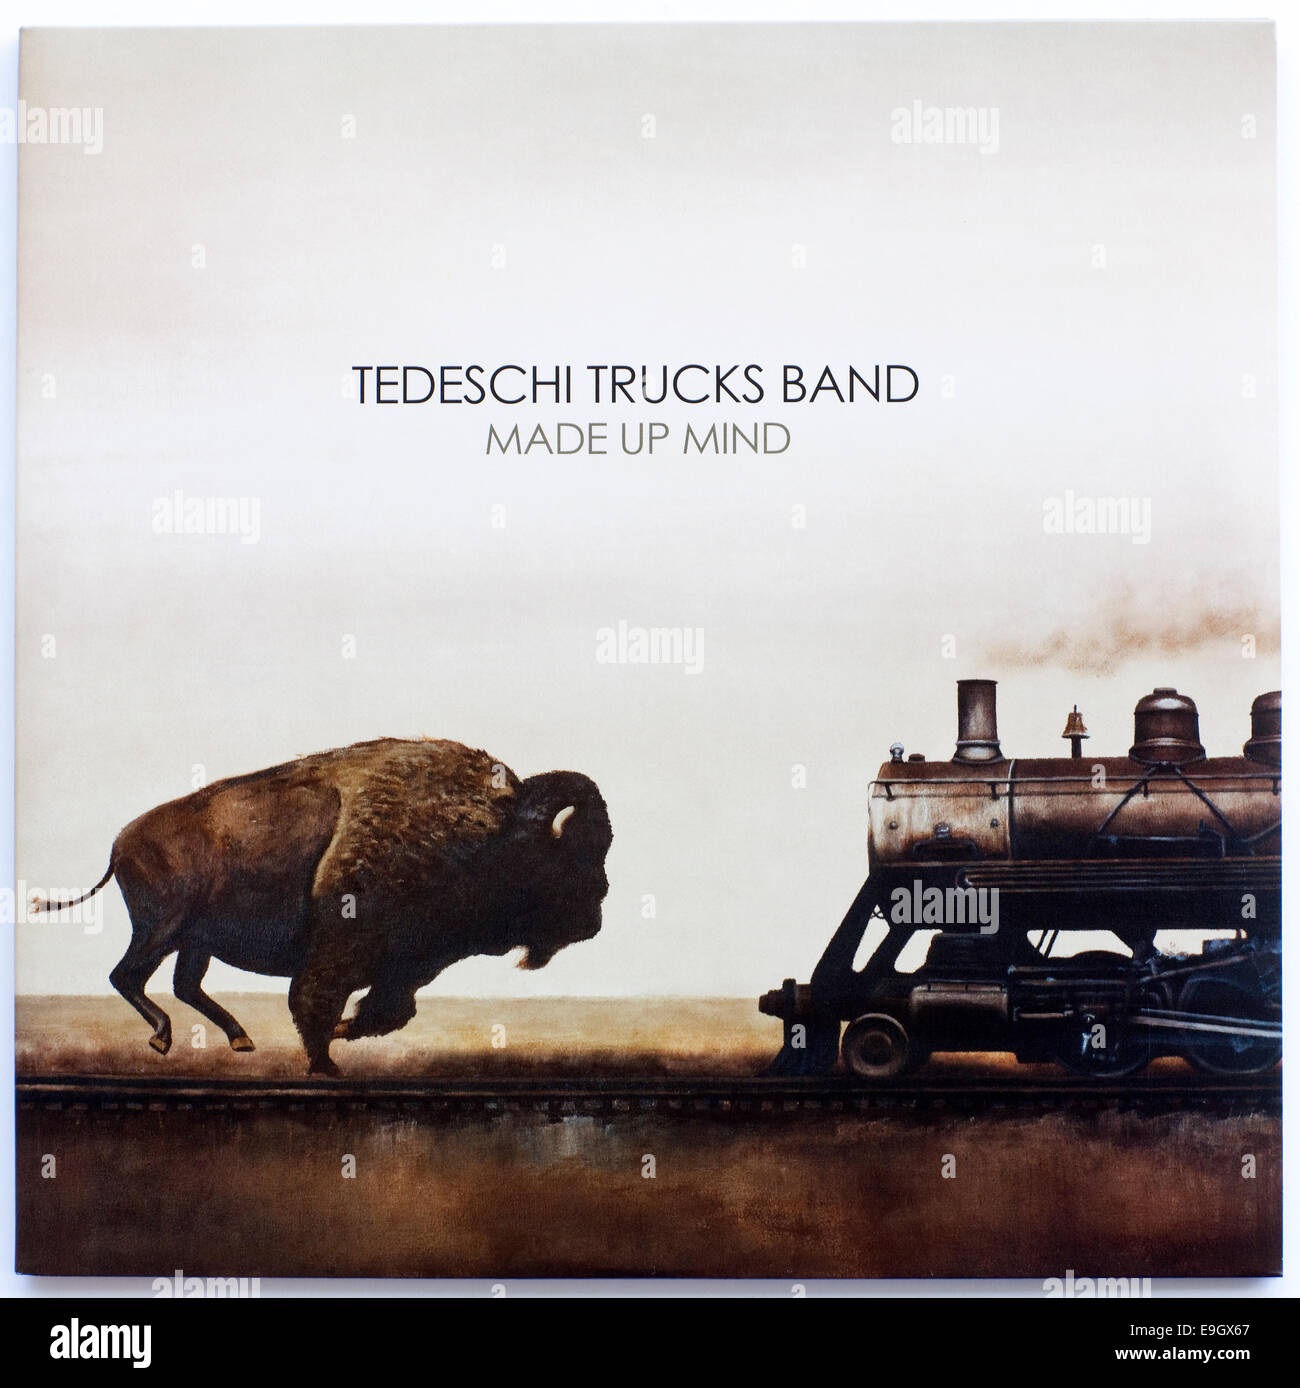 Cover art for Tedeschi Trucks Band - Made Up Mind, 2013 vinyl album on Masterworks Records - Editorial use only Stock Photo